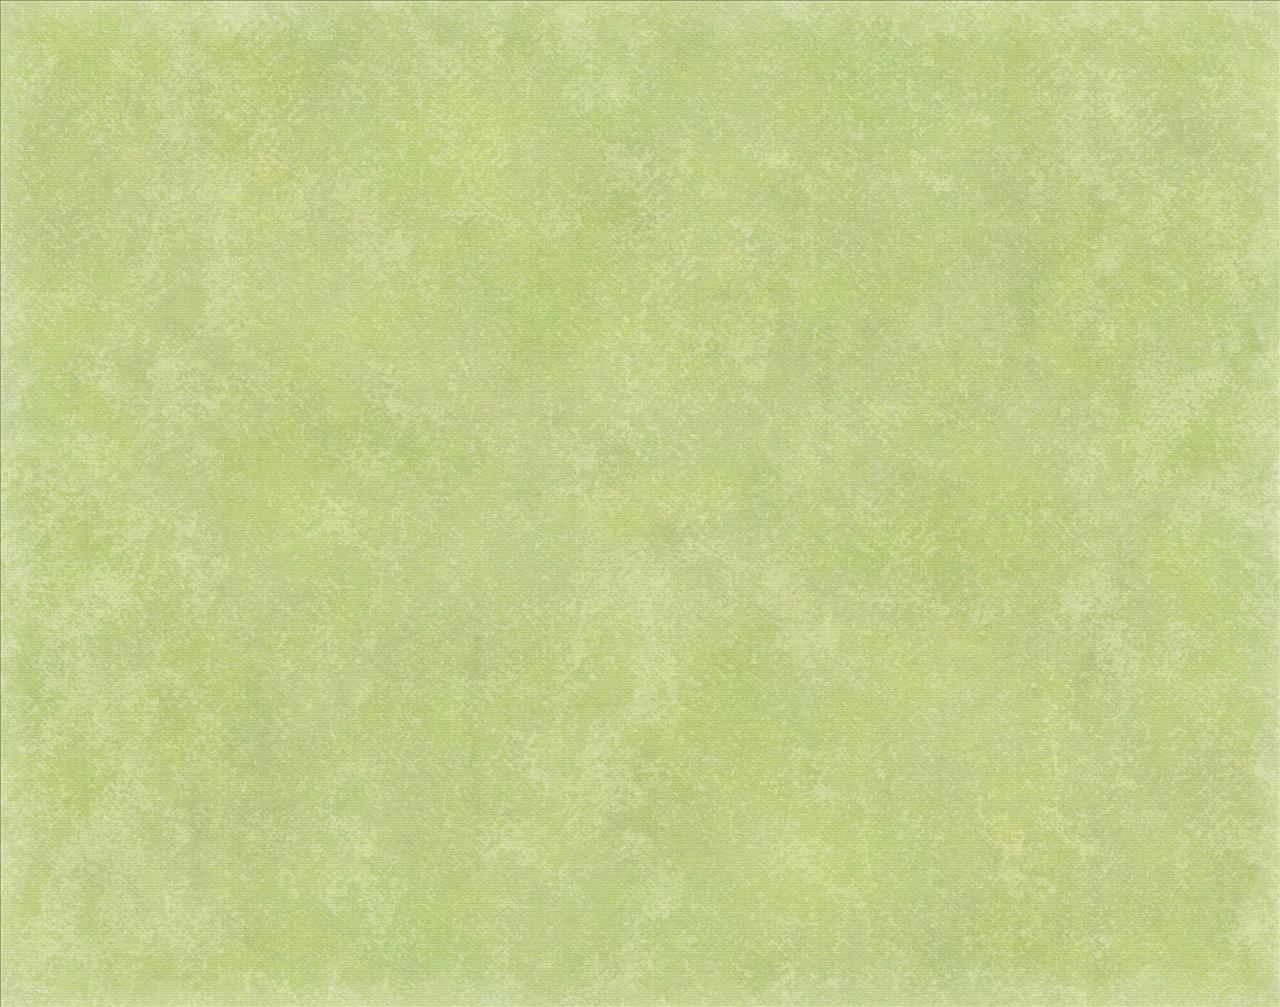 Pale Green Background Images amp Pictures   Becuo